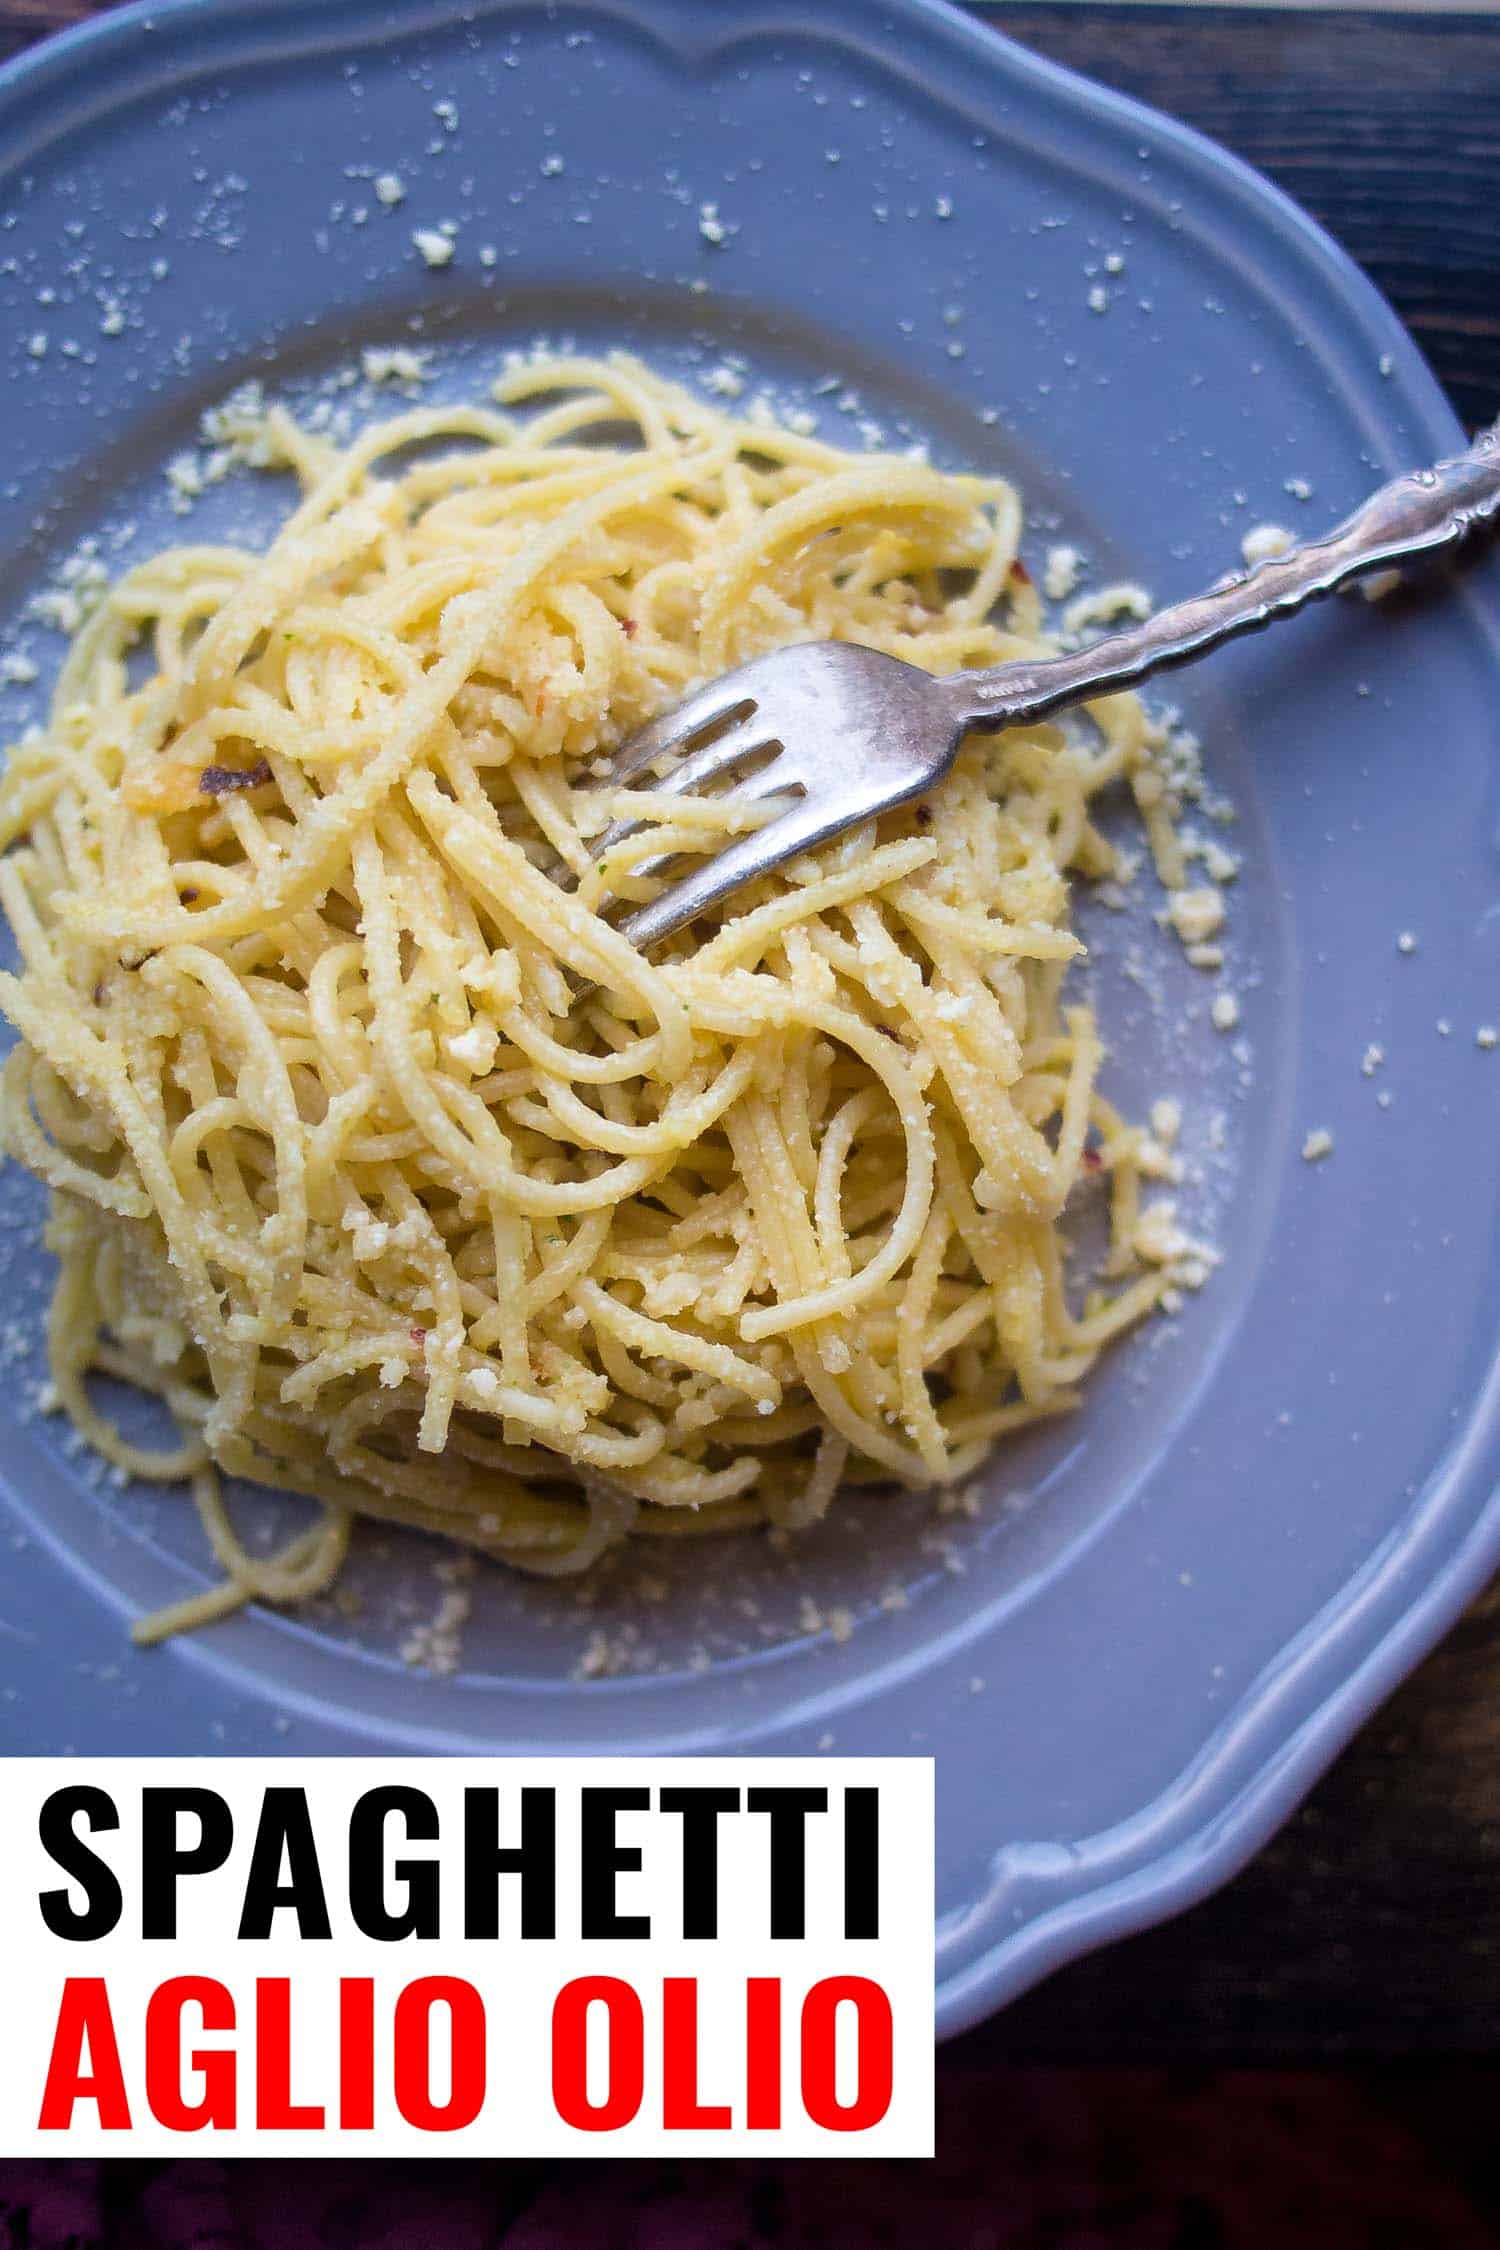 Spaghetti with garlic, chili flakes and parmesan on a blue plate.